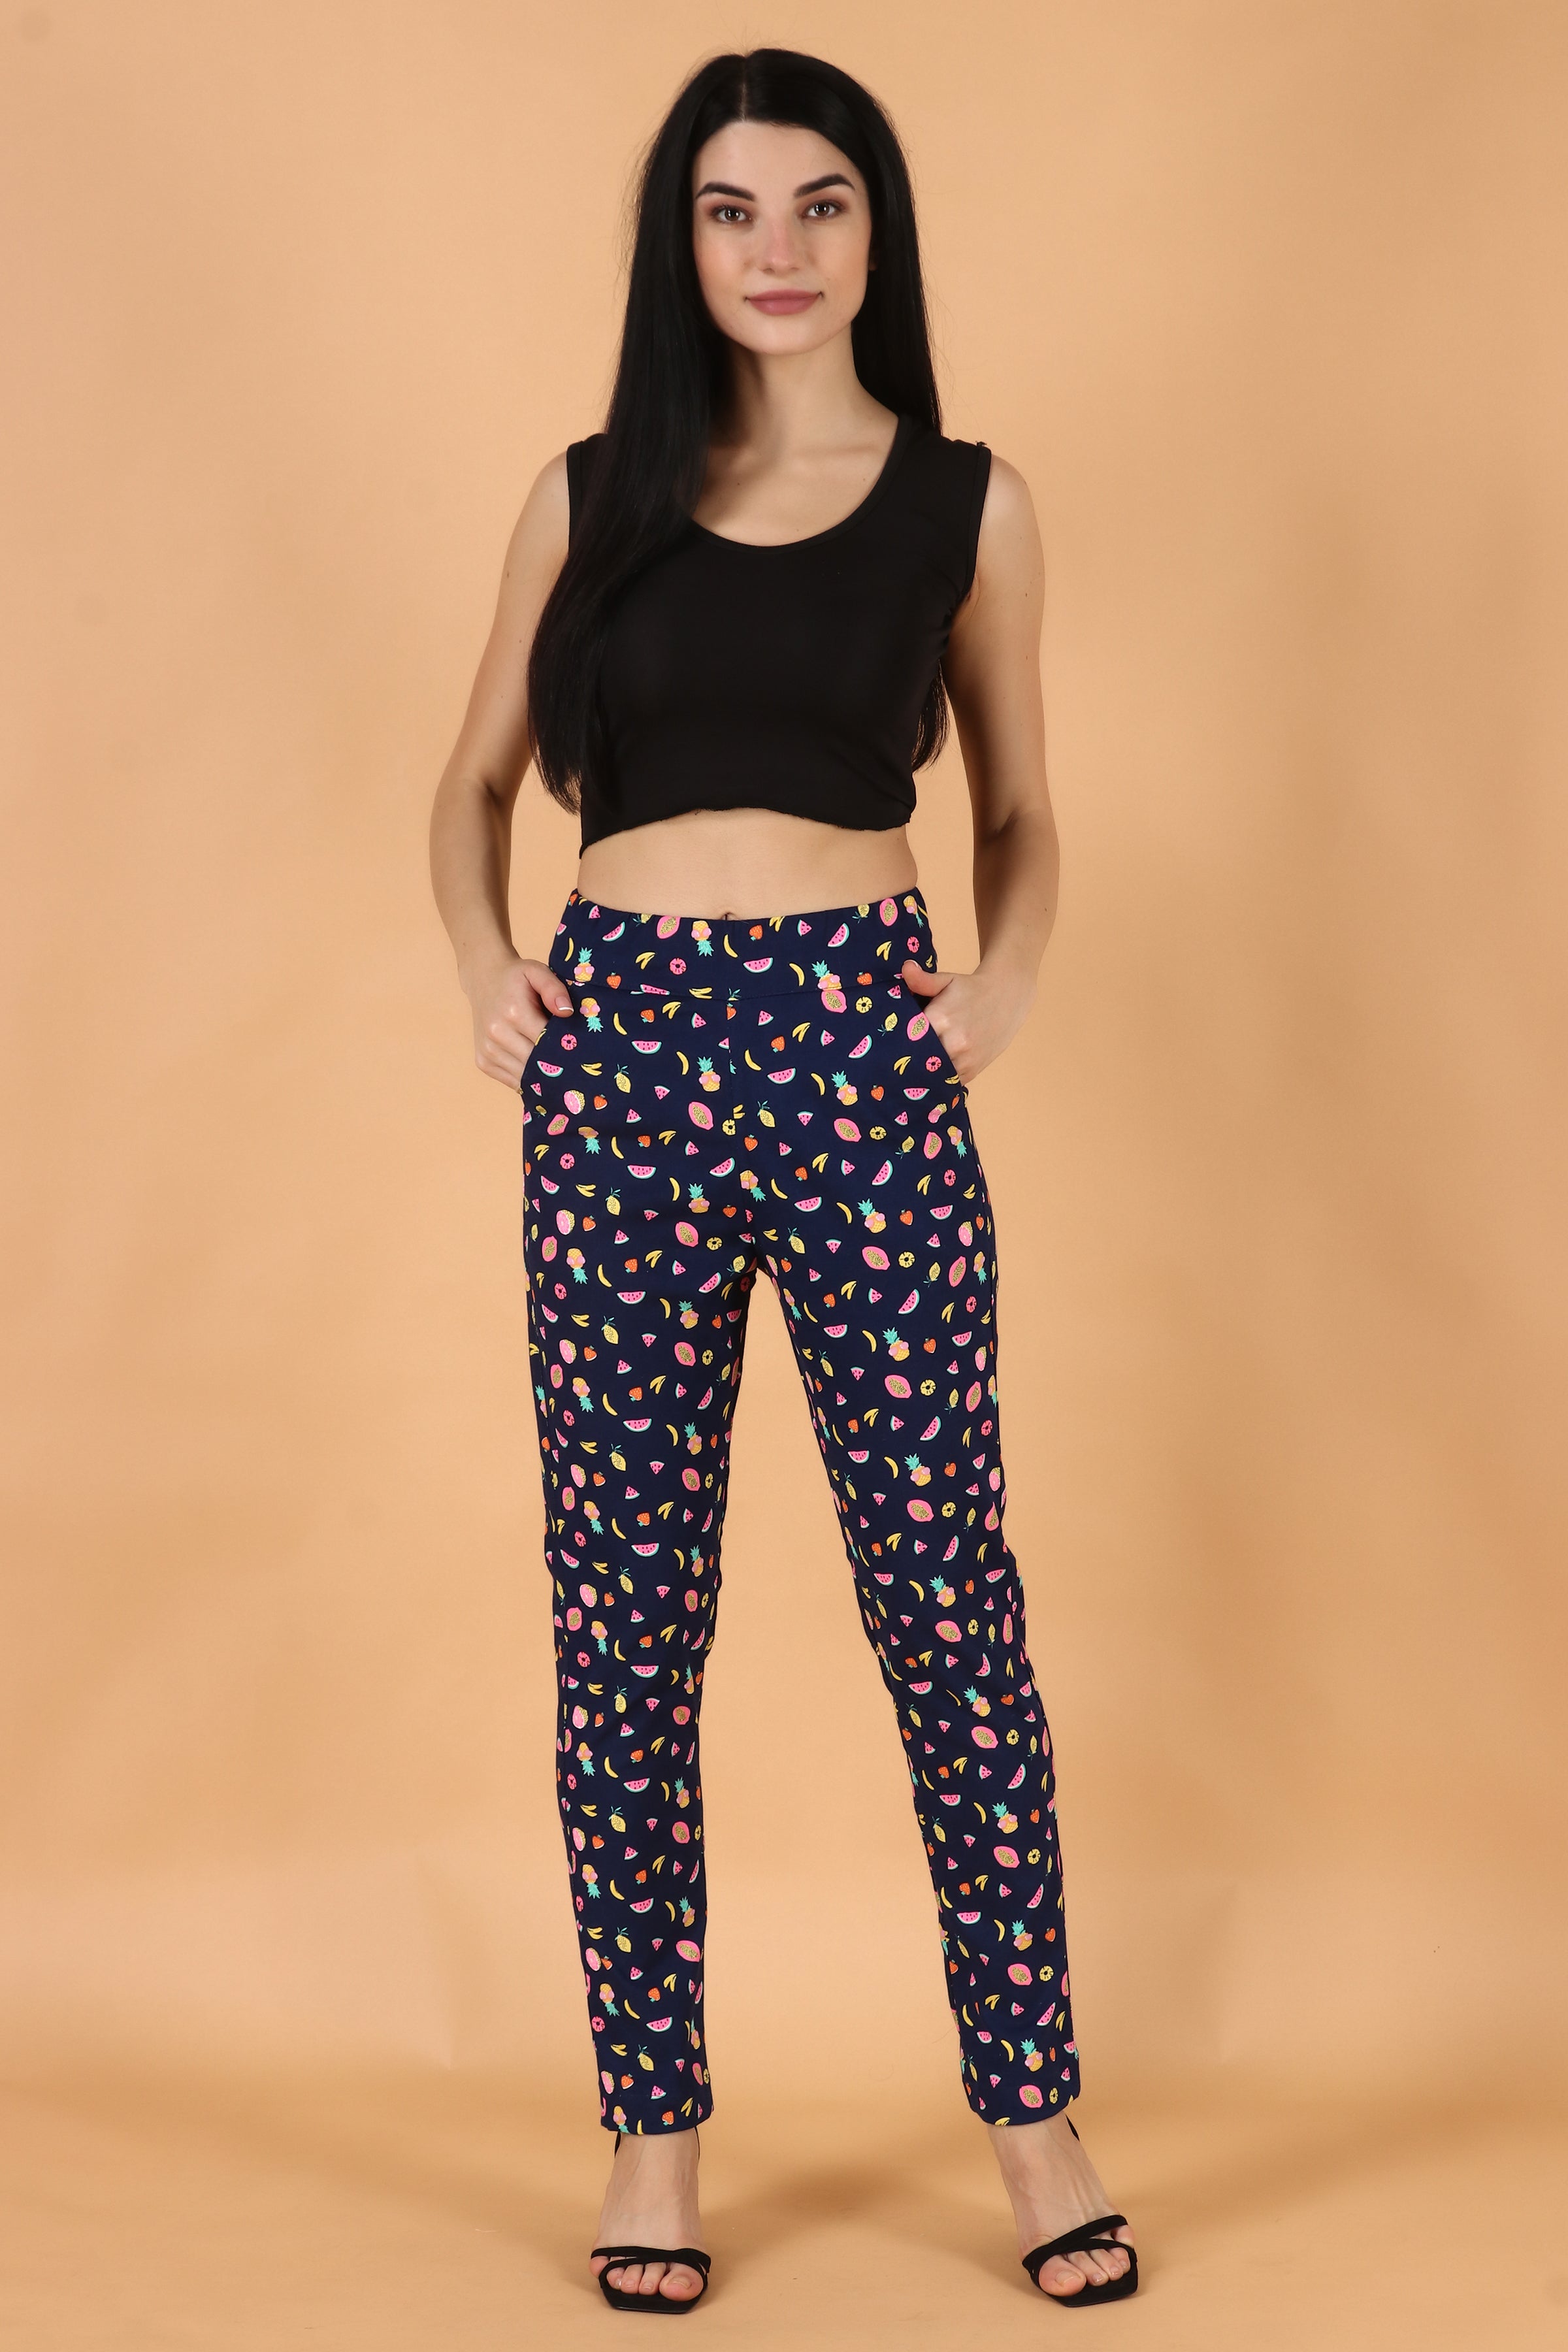 Buy online Blue Printed Trousers from bottom wear for Women by Globus for  1999 at 0 off  2023 Limeroadcom